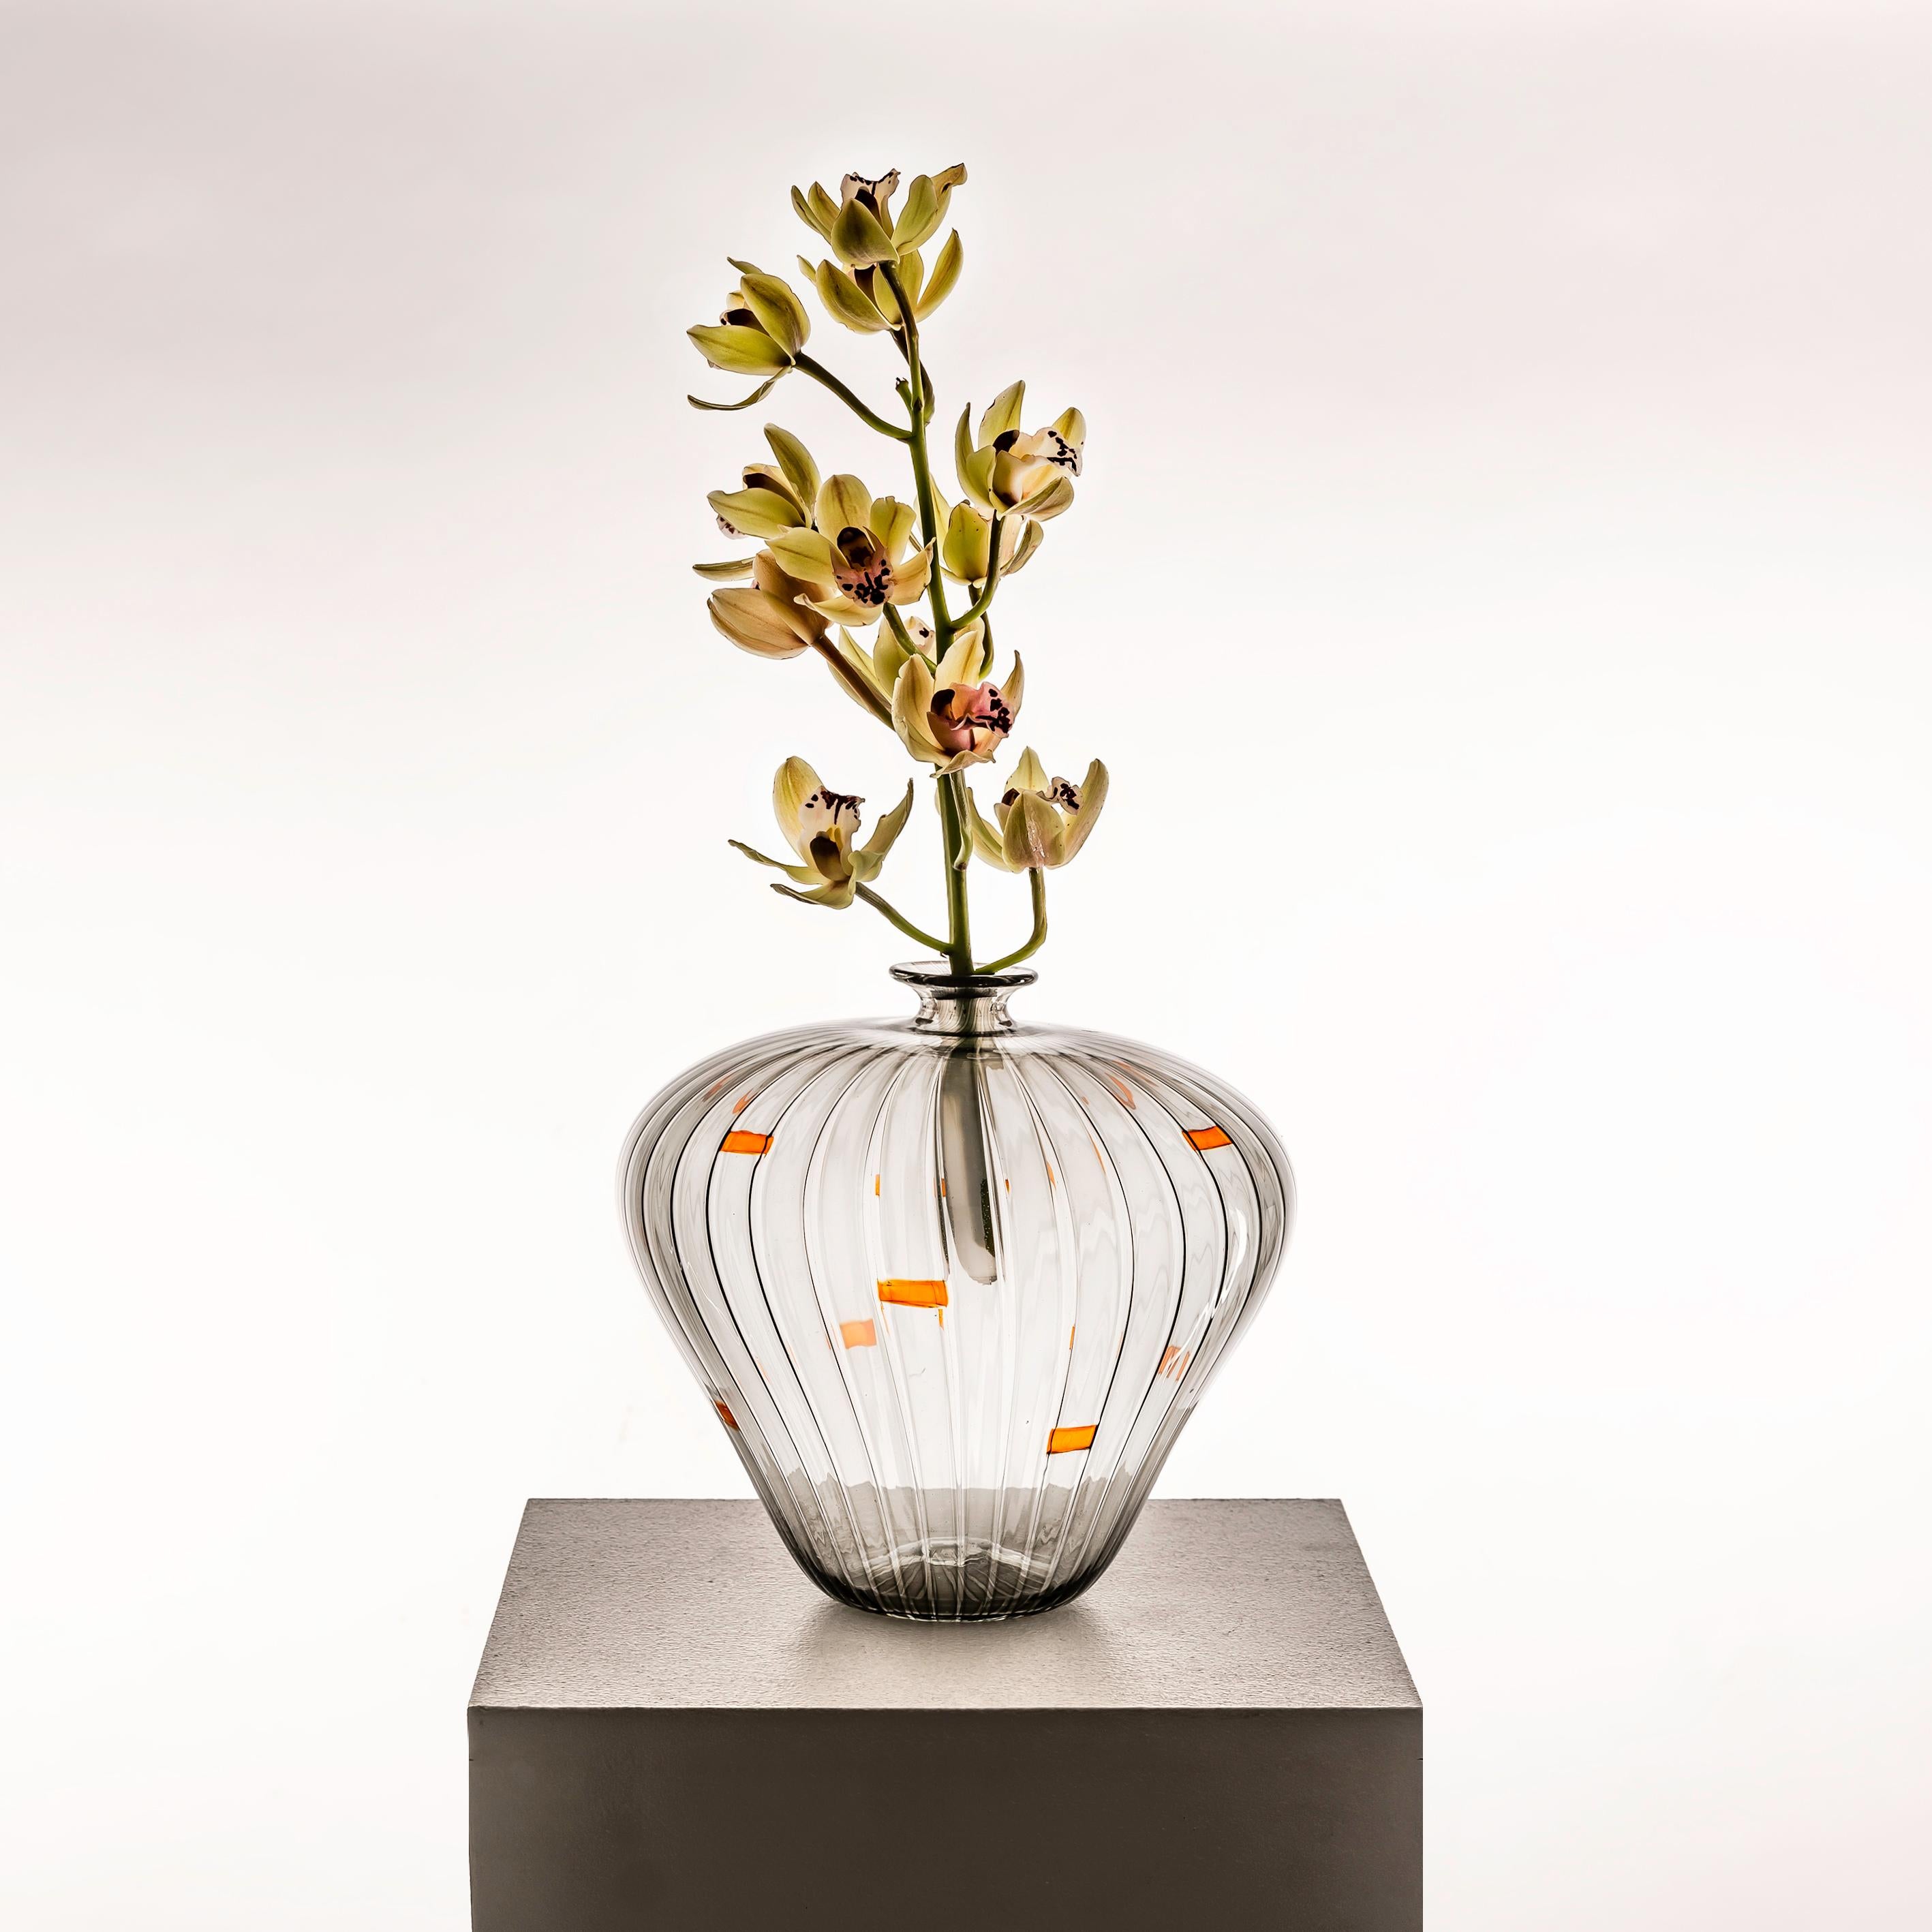 Dive into the mesmerizing beauty of an Italian Murano Glass Vessel by Orlando Zennaro, a sublime creation from the 1970s. This exquisite piece, in shades of grey with vibrant orange inclusions, reflects Zennaro's mastery of Murano glass artistry.